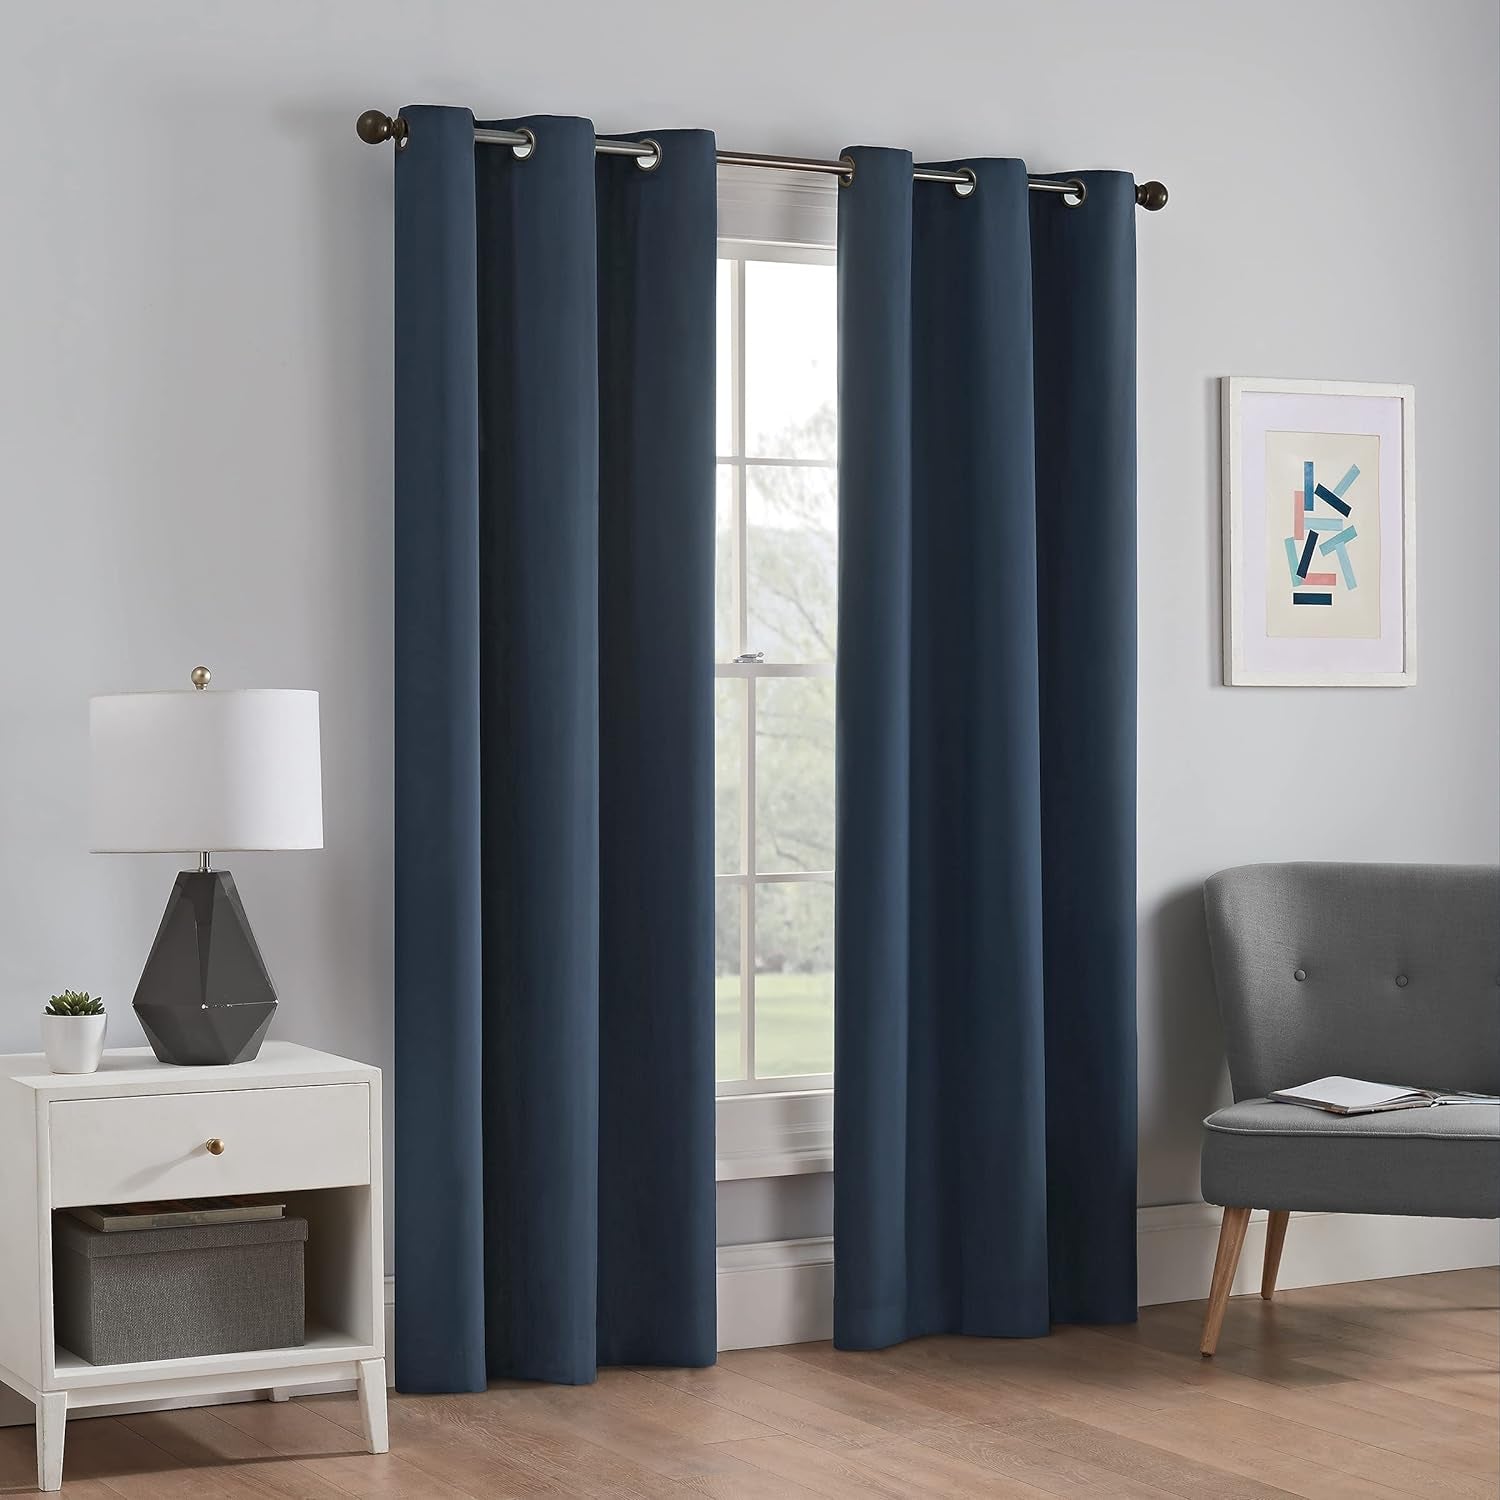 Eclipse Microfiber Total Privacy Blackout Thermal Grommet Window Curtain for Bedroom (1 Panel), 42 in X 63 In, Black  Keeco LLC   